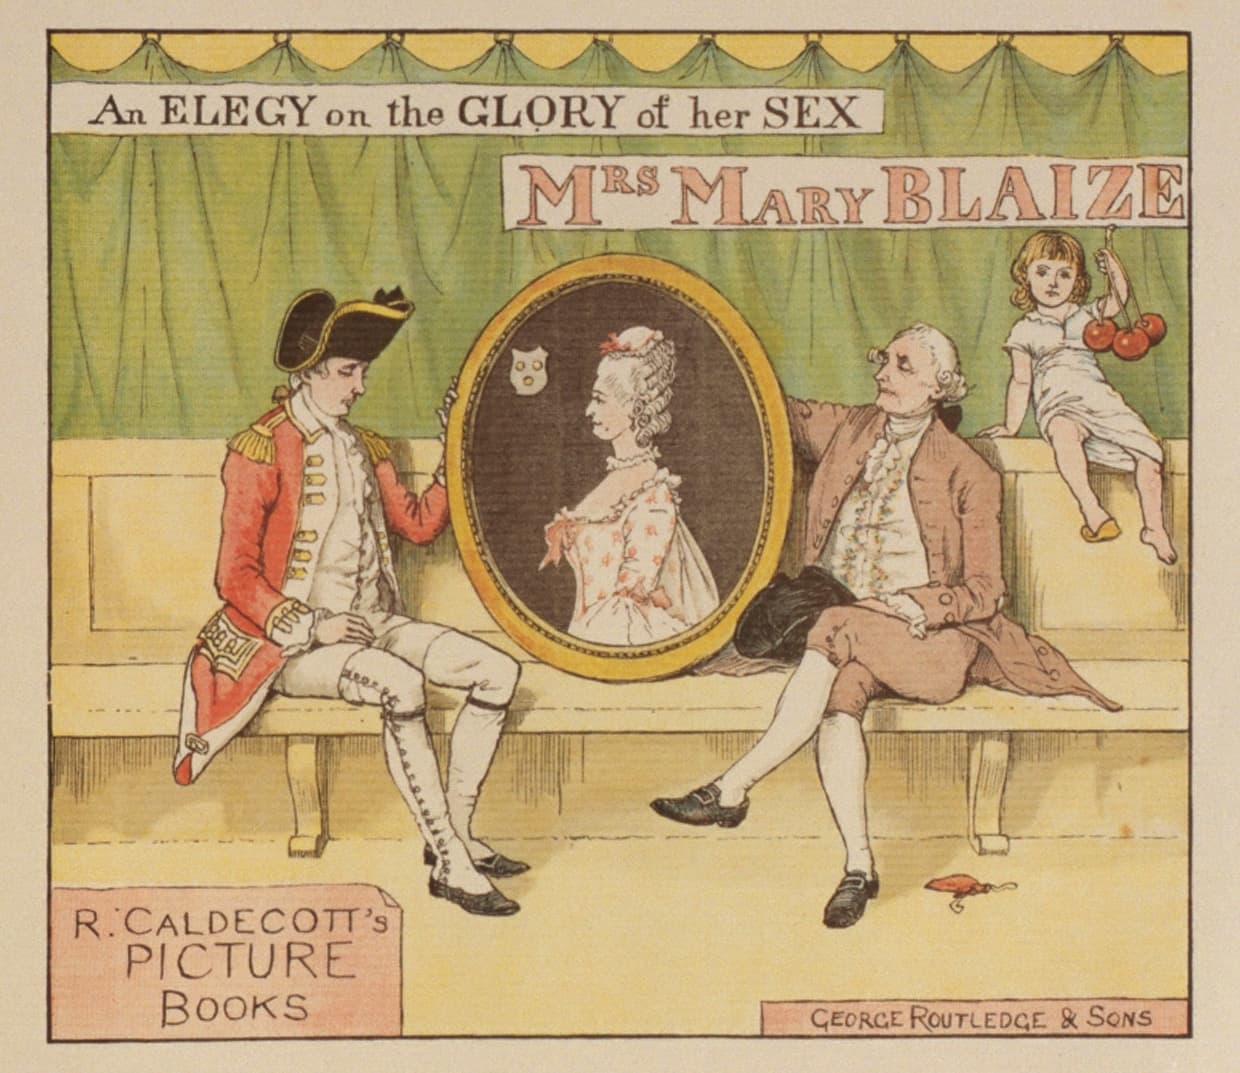 Front cover of Mrs. Mary Blaize (page 449 of The Complete Collection of PICTURES and SONGS)